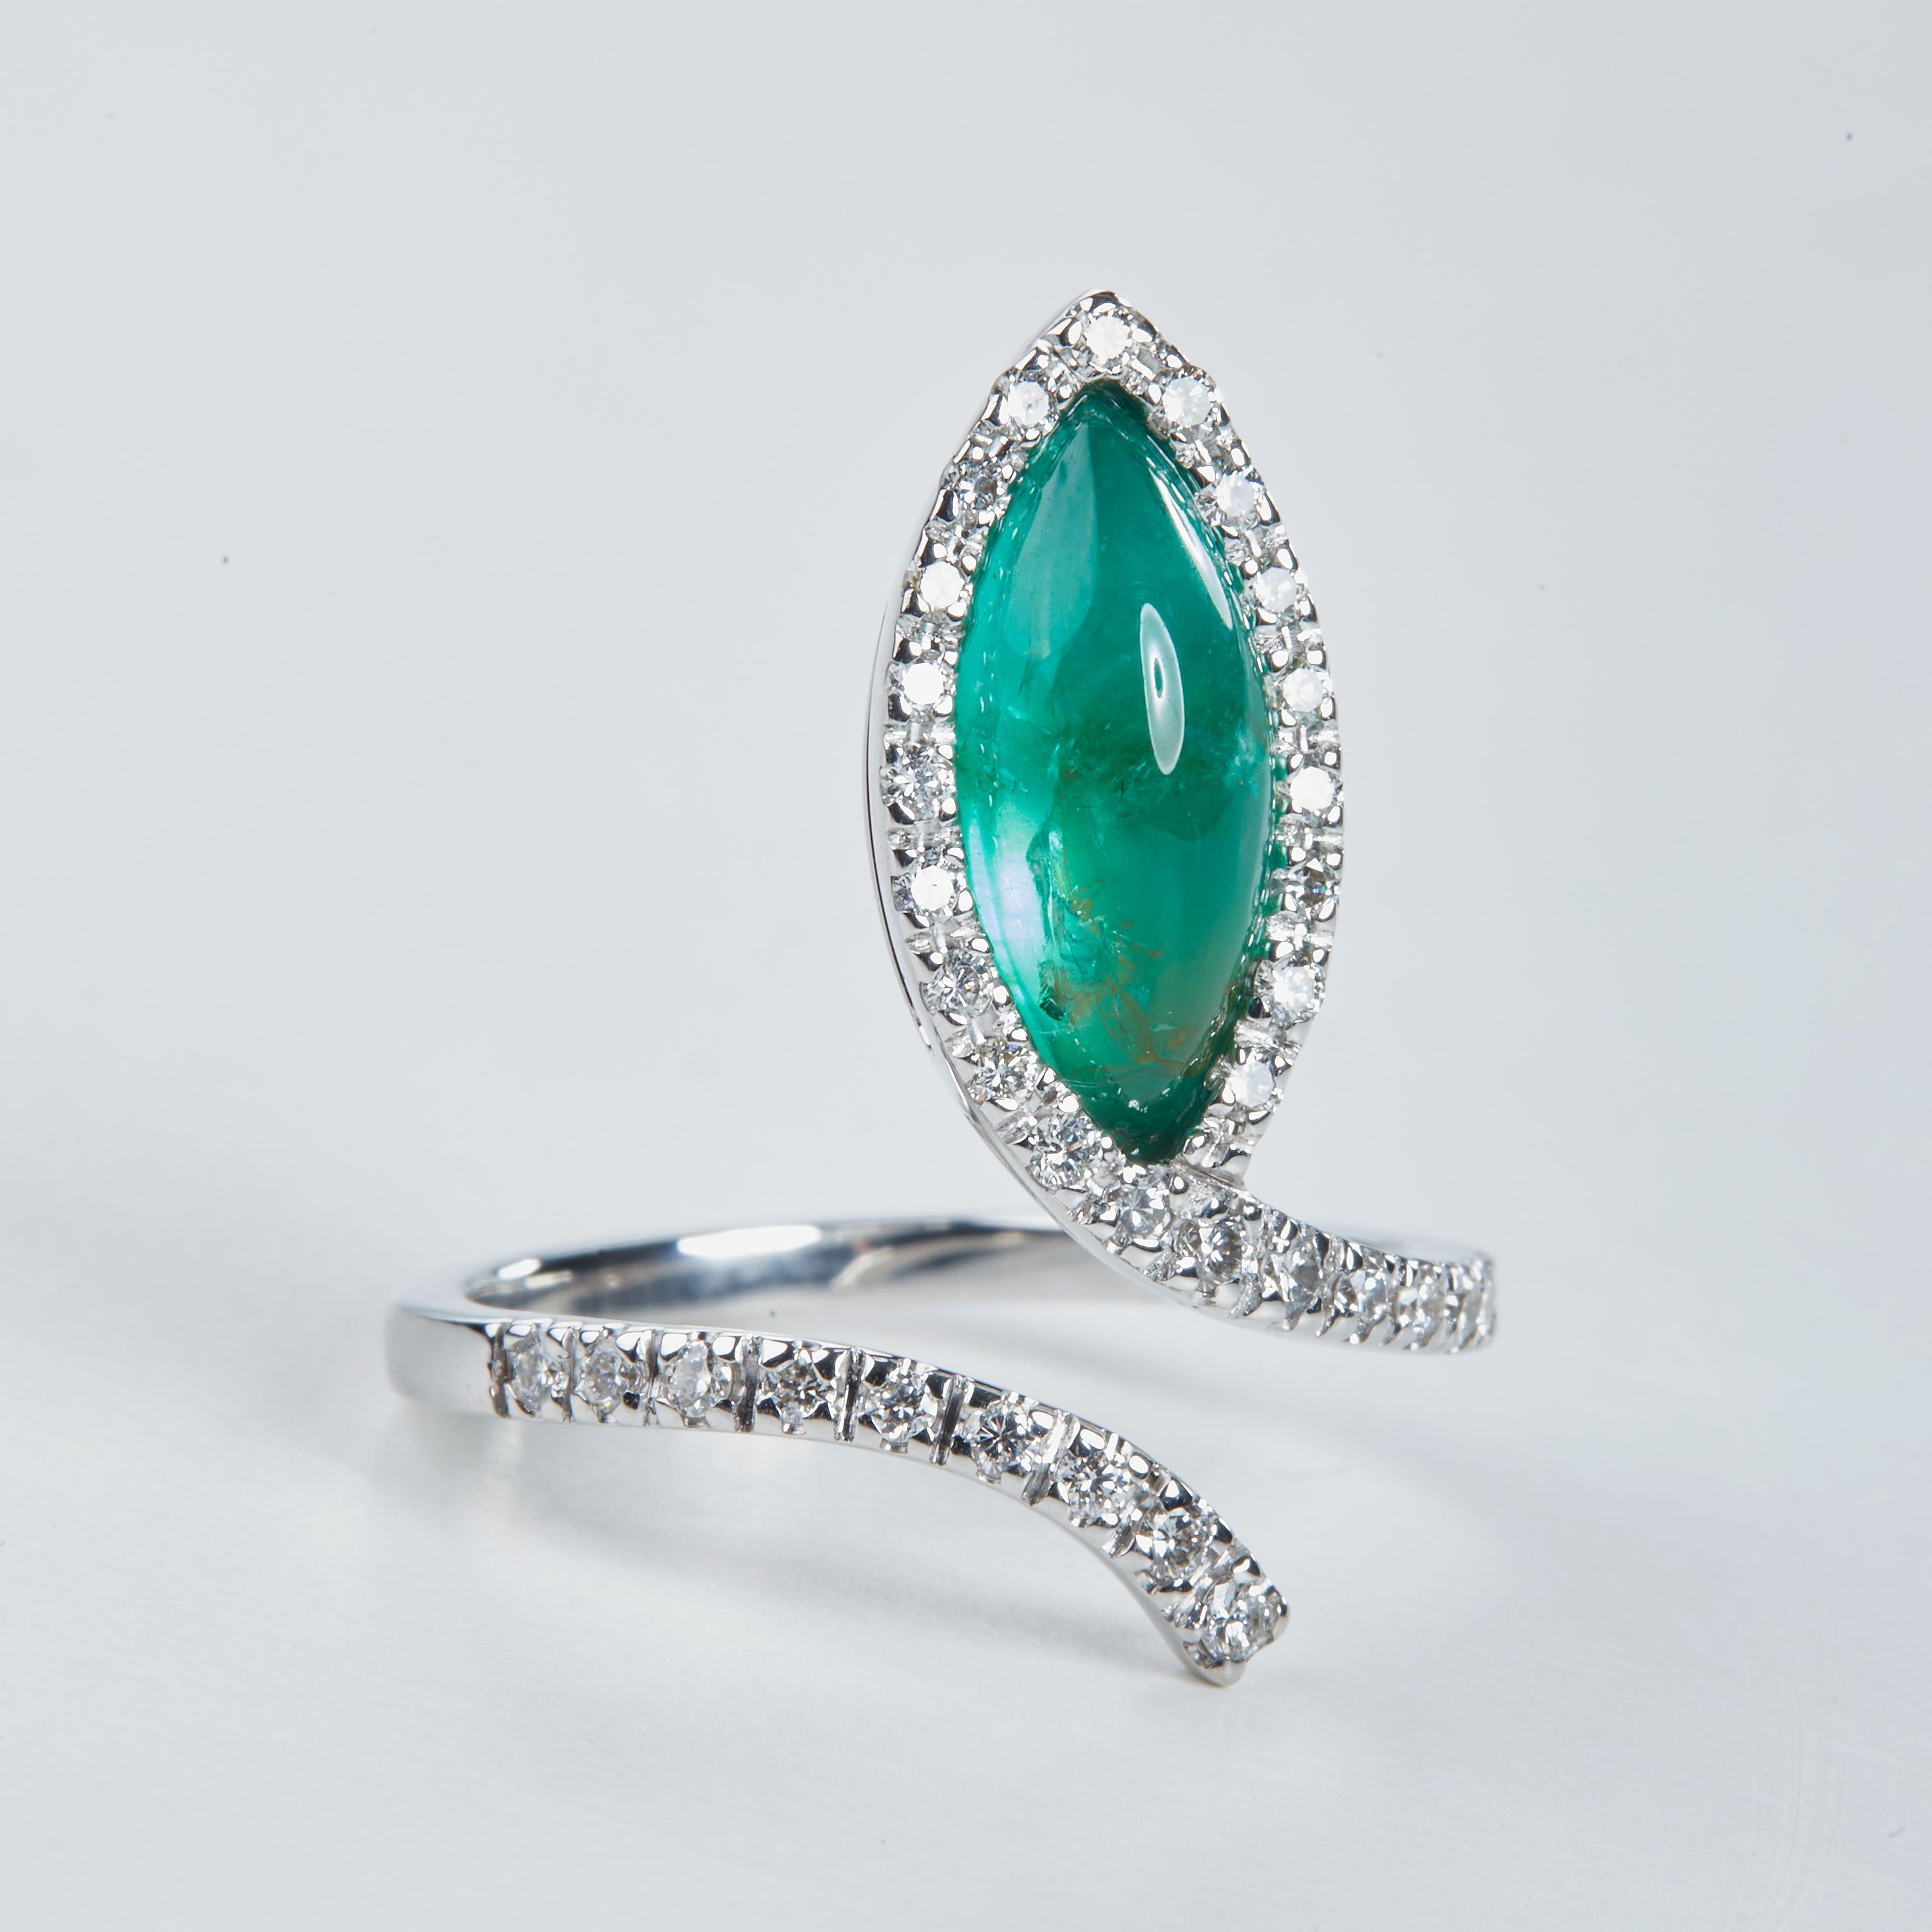 18 Karat White Gold Diamond and Emerald Ring

37 Diamonds 0.41 Carat
 1 Emerald 2.10 carat



Size EU 54 US 6.8


Founded in 1974, Gianni Lazzaro is a family-owned jewelery company based out of Düsseldorf, Germany.
Although rooted in Germany, Gianni